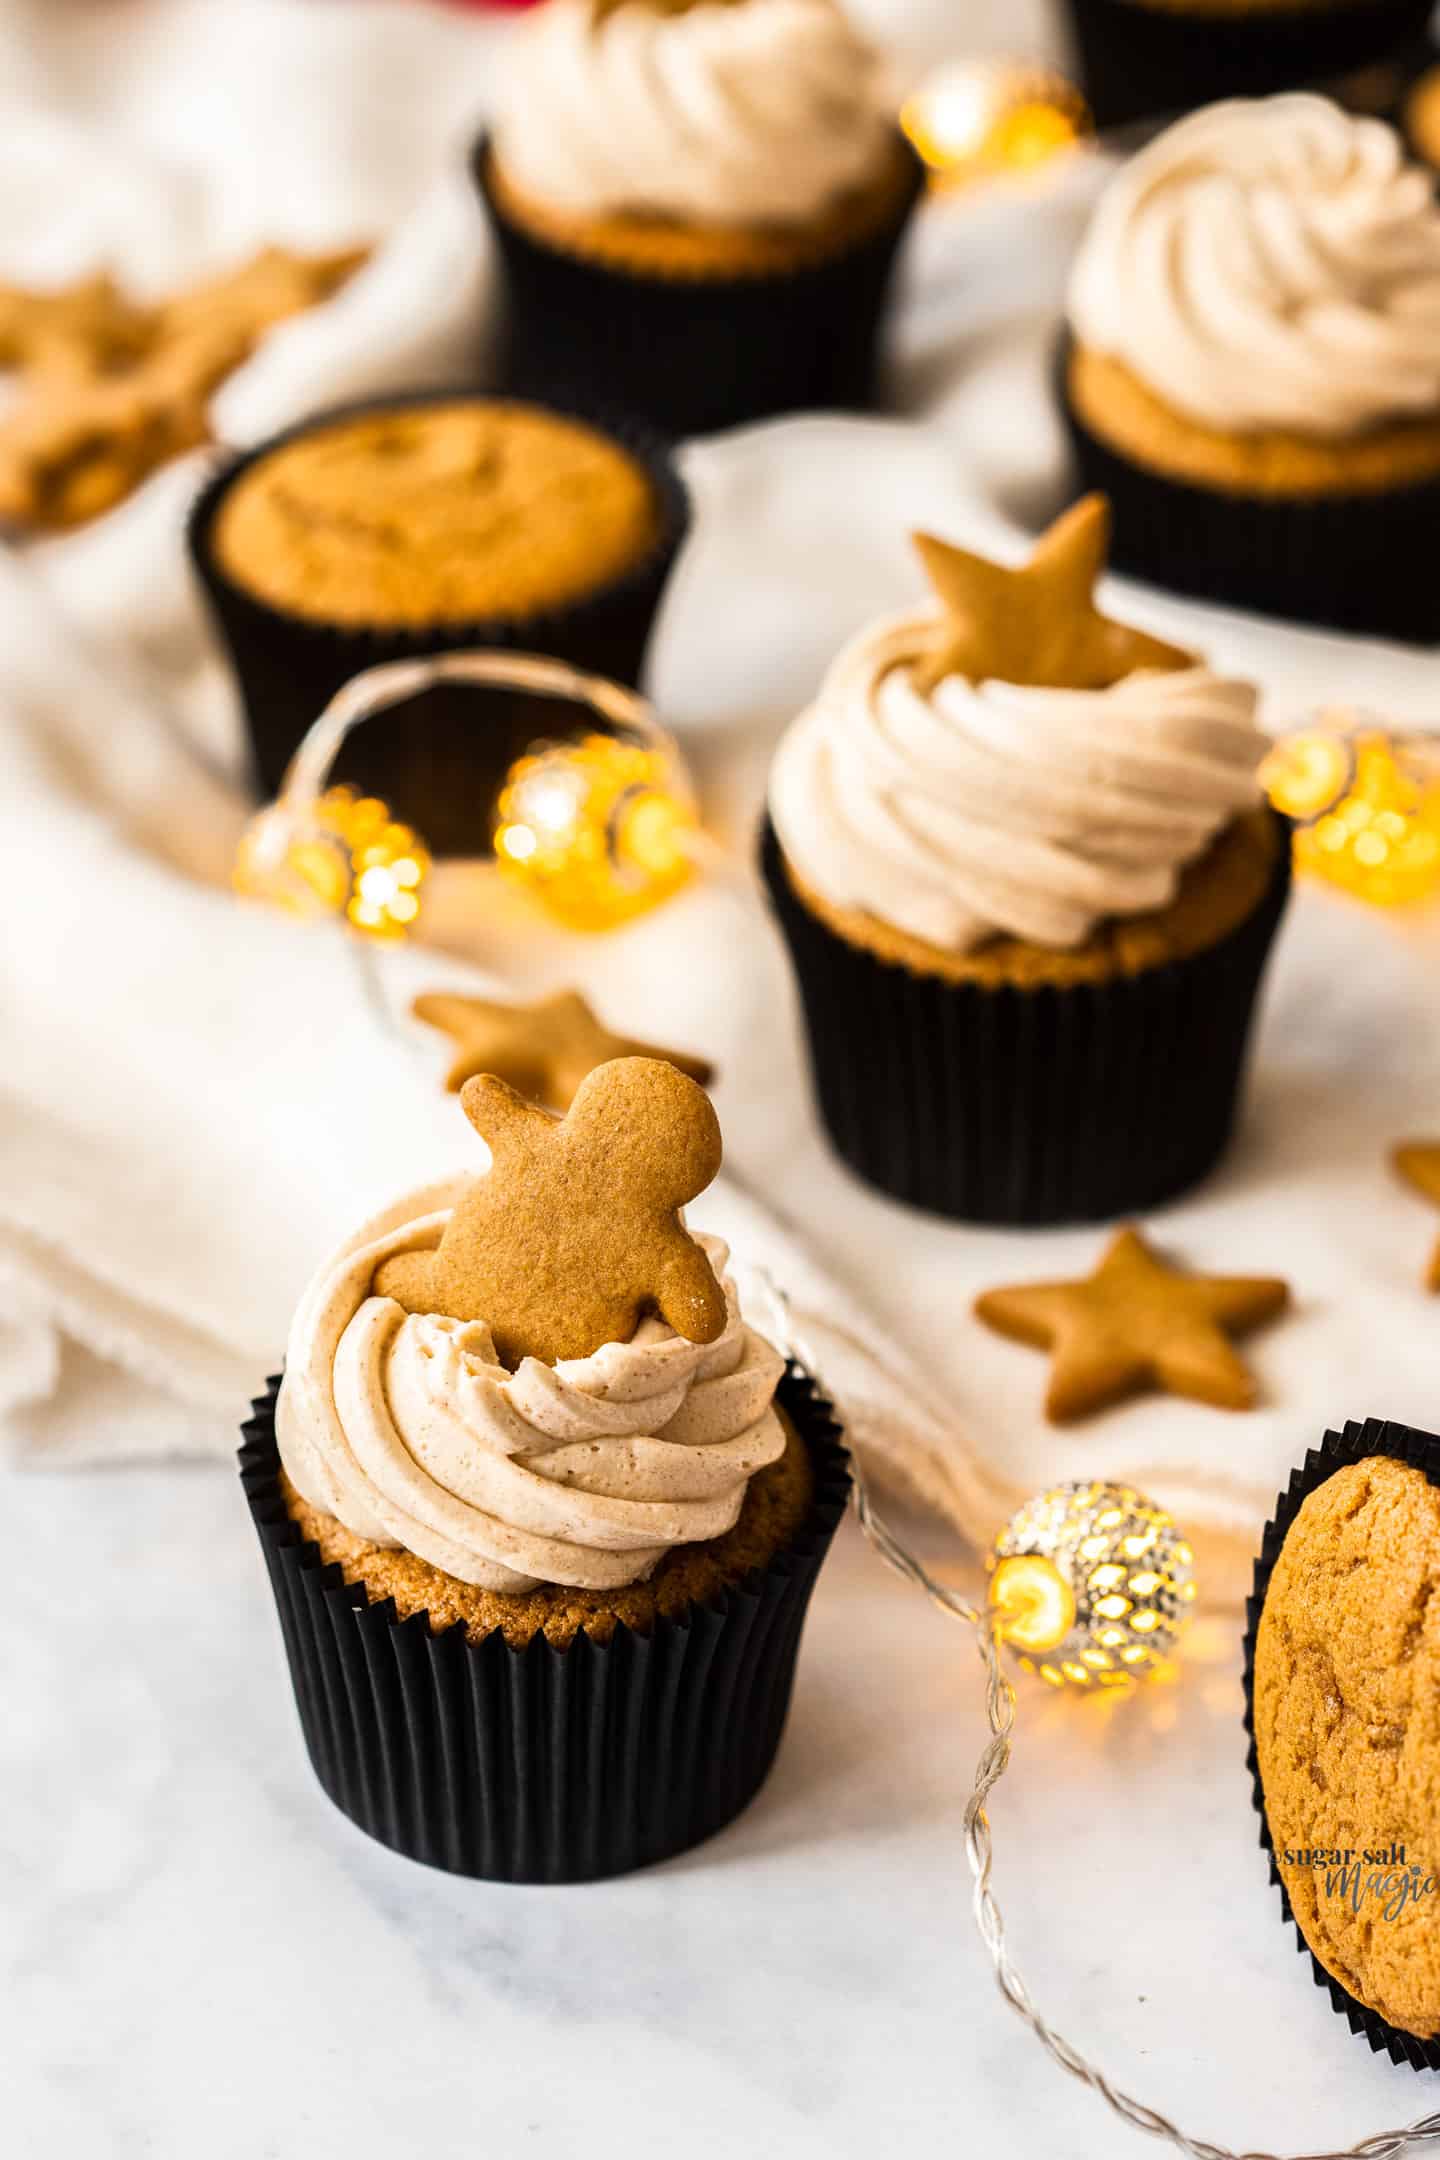 A gingerbread cupcake with a man shaped gingerbread cookie on top.